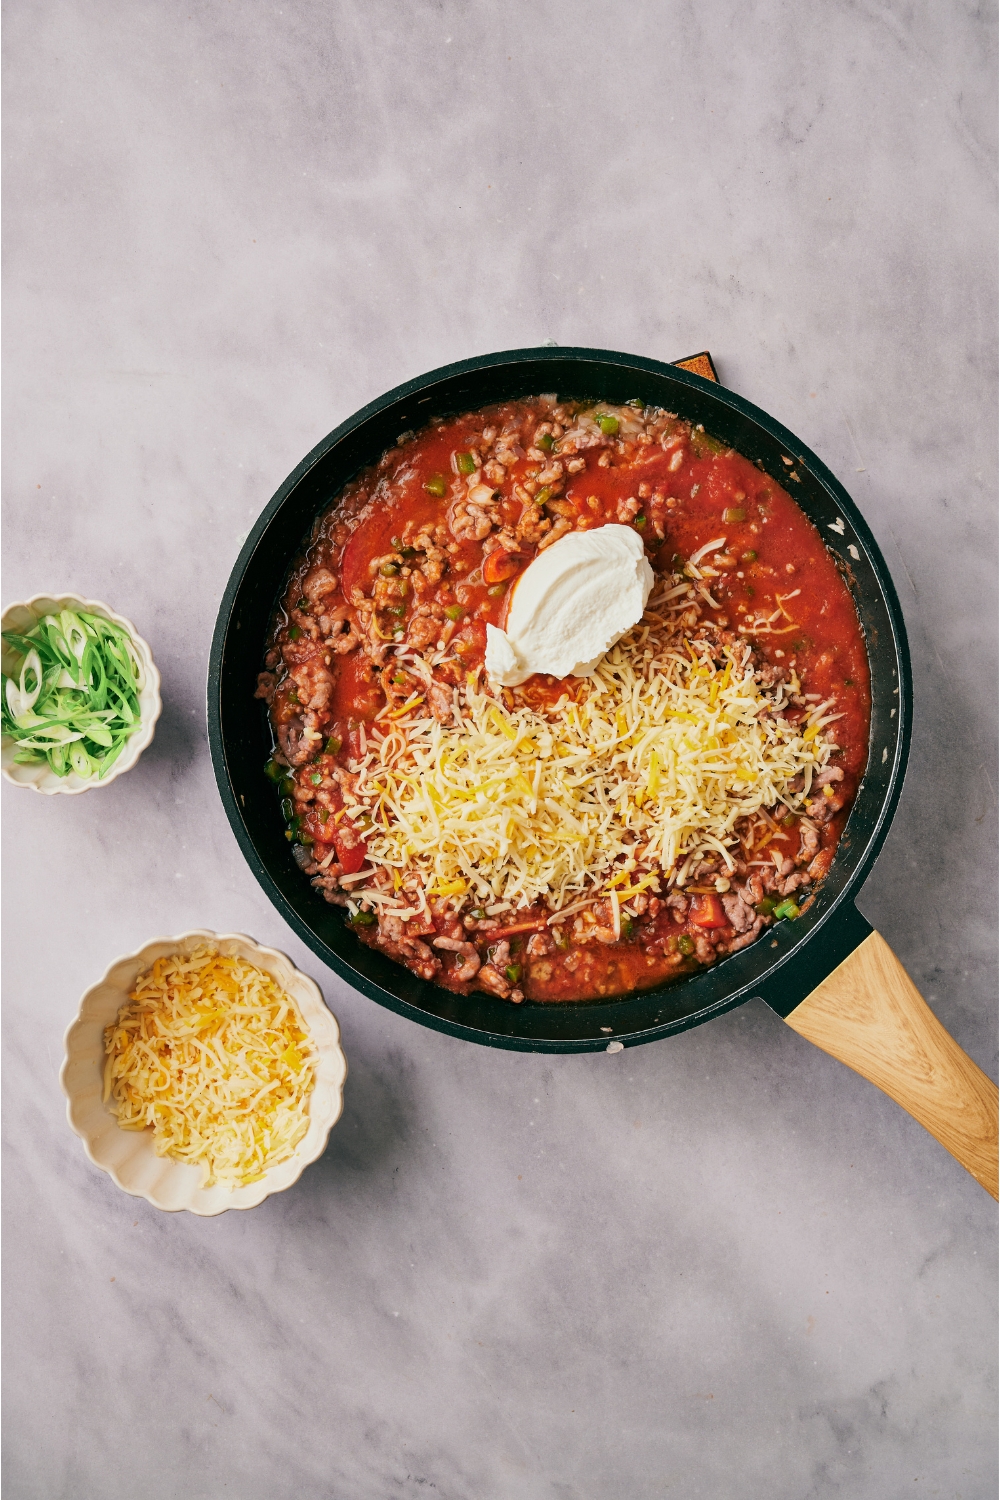 A skillet filled with ground beef, diced peppers and onion, tomato sauce, shredded cheese, and a dollop of sour cream added but not yet combined.